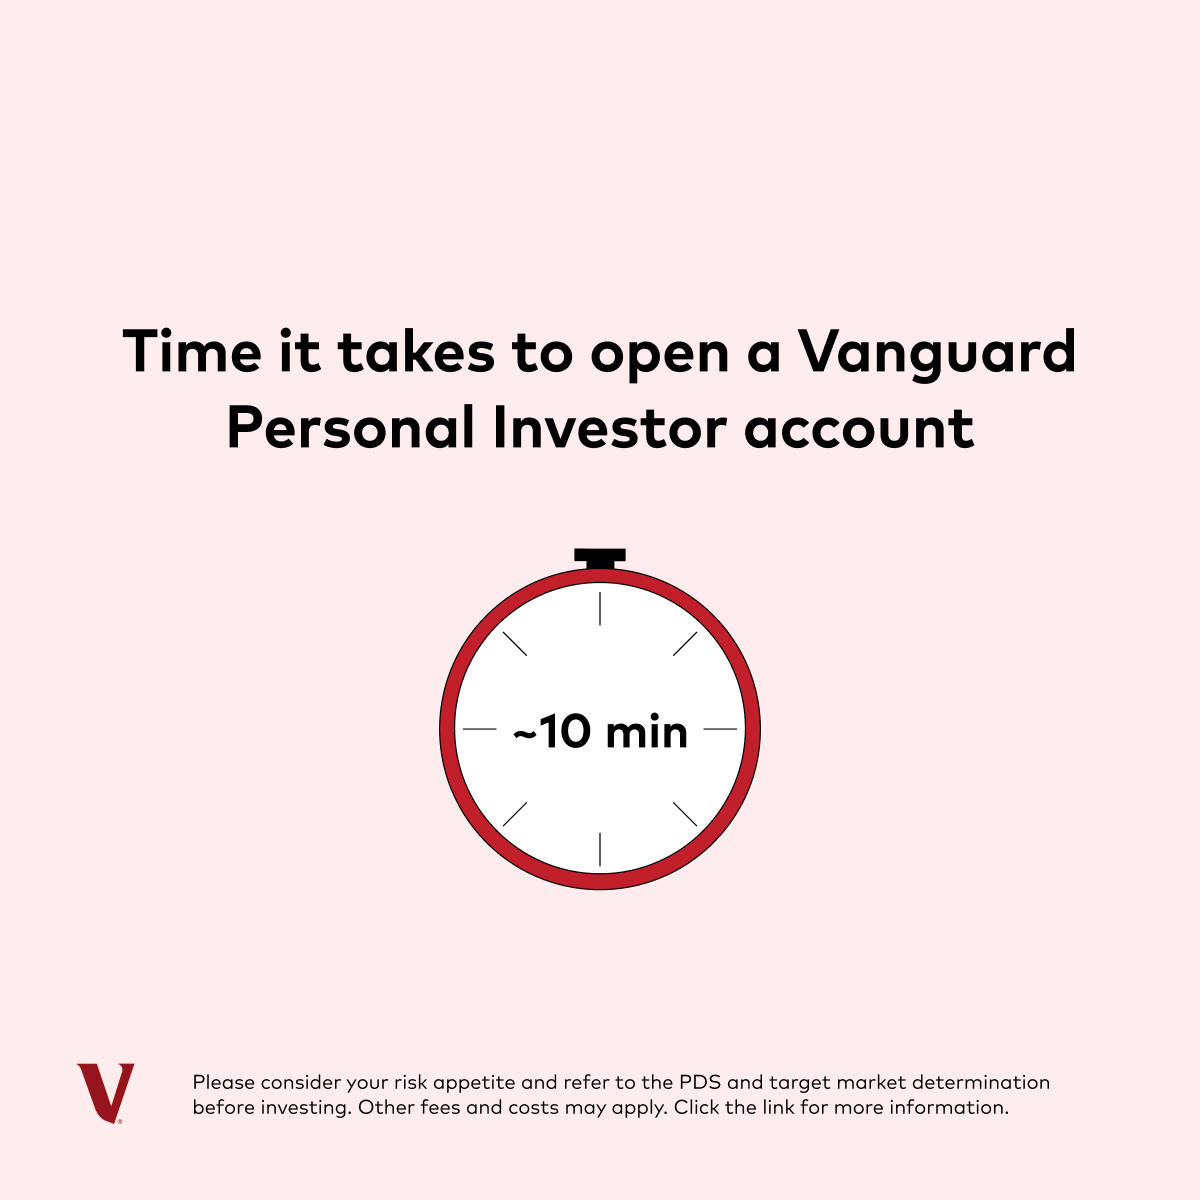 Swiftly open a Vanguard Personal Investor Account today. Find out more here 👉 vgi.vg/445PIDt